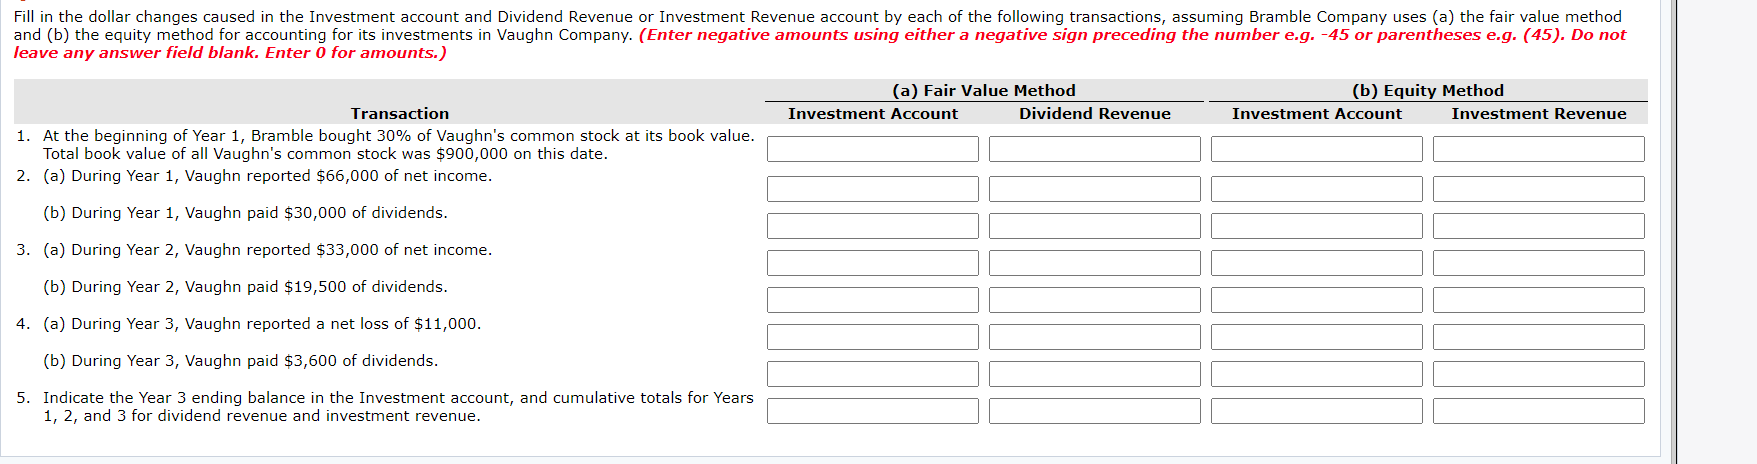 Fill in the dollar changes caused in the Investment account and Dividend Revenue or Investment Revenue account by each of the following transactions, assuming Bramble Company uses (a) the fair value method
and (b) the equity method for accounting for its investments in Vaughn Company. (Enter negative amounts using either a negative sign preceding the number e.g. -45 or parentheses e.g. (45). Do not
leave any answer field blank. Enter 0 for amounts.)
(a) Fair Value Method
(b) Equity Method
Transaction
Investment Account
Dividend Revenue
Investment Account
Investment Revenue
1. At the beginning of Year 1, Bramble bought 30% of Vaughn's common stock at its book value.
Total book value of all Vaughn's common stock was $900,000 on this date.
2. (a) During Year 1, Vaughn reported $66,000 of net income.
(b) During Year 1, Vaughn paid $30,000 of dividends.
3. (a) During Year 2, Vaughn reported $33,000 of net income.
(b) During Year 2, Vaughn paid $19,500 of dividends.
4. (a) During Year 3, Vaughn reported a net loss of $11,000.
(b) During Year 3, Vaughn paid $3,600 of dividends.
5. Indicate the Year 3 ending balance in the Investment account, and cumulative totals for Years
1, 2, and 3 for dividend revenue and investment revenue.
